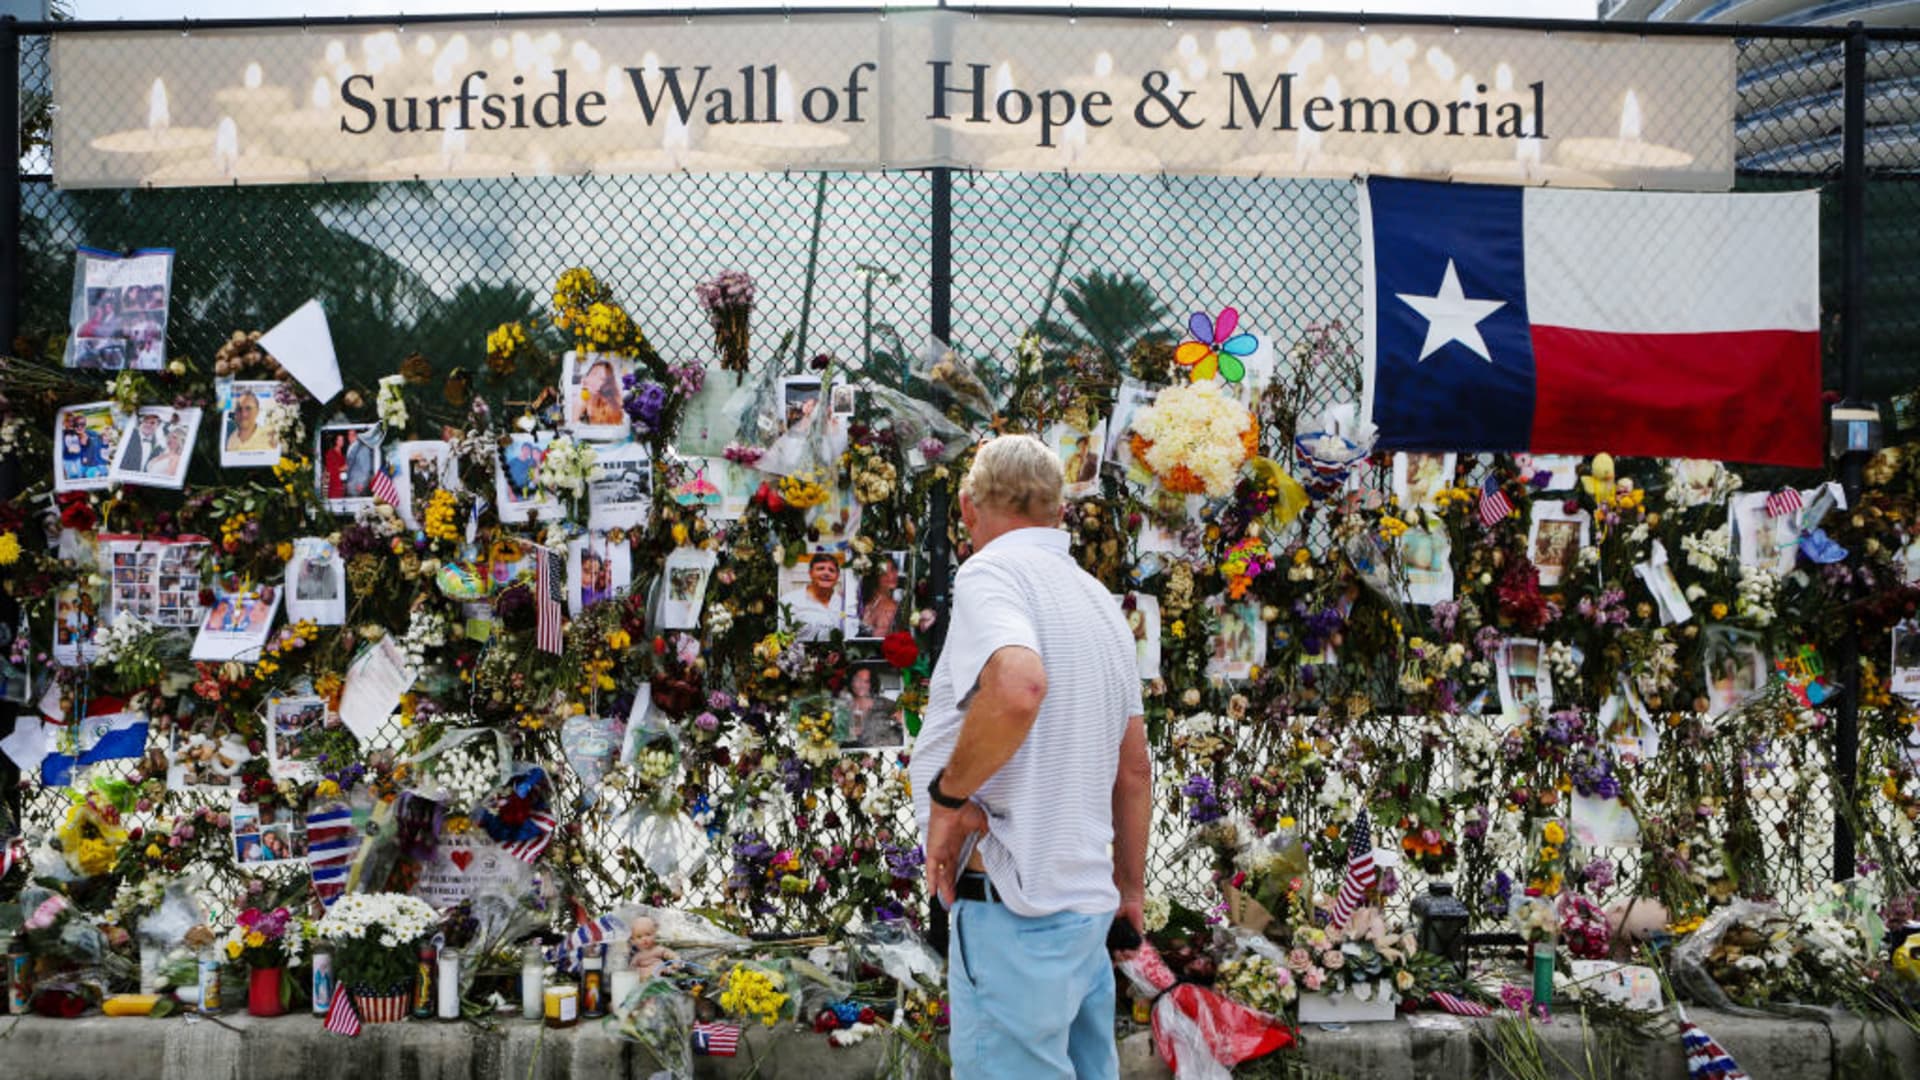 A man is seen at the Surfside wall of hope & memorial in Surfside, Florida, U.S., on July 05, 2021.